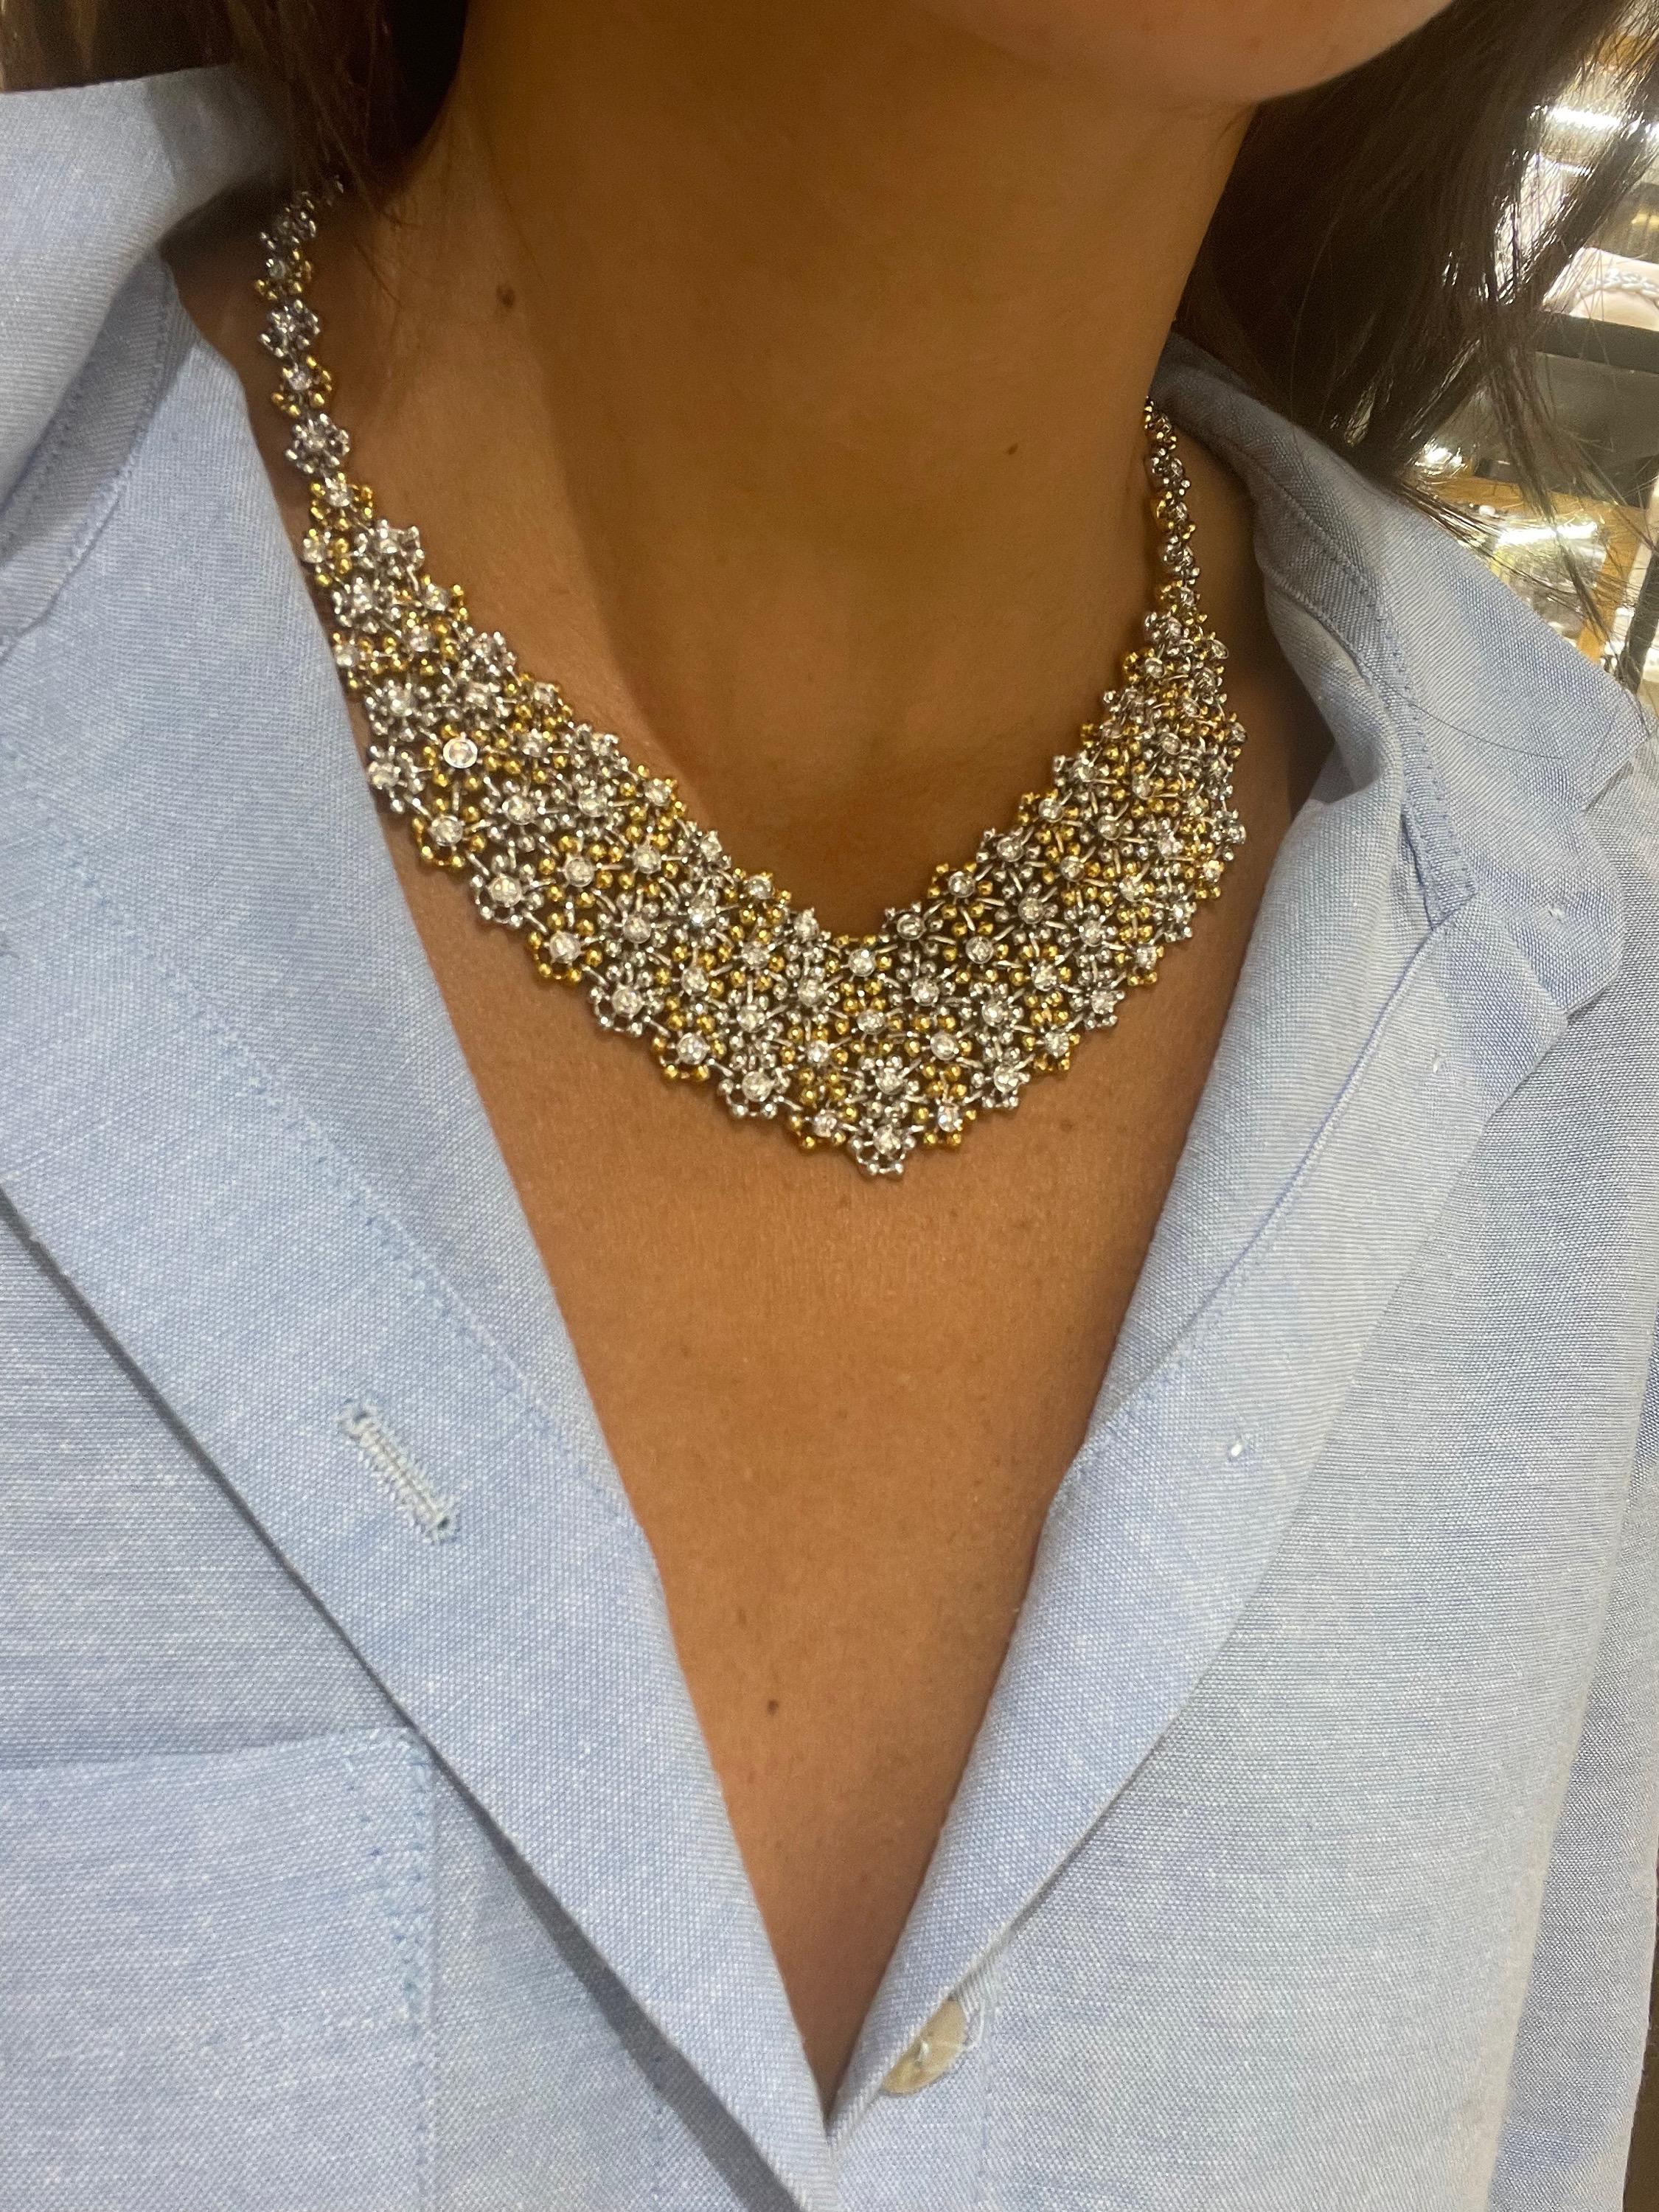 Damiani 18KT Yellow and White Gold Bib Necklace with 4.92Ct. Diamond  In New Condition For Sale In New York, NY